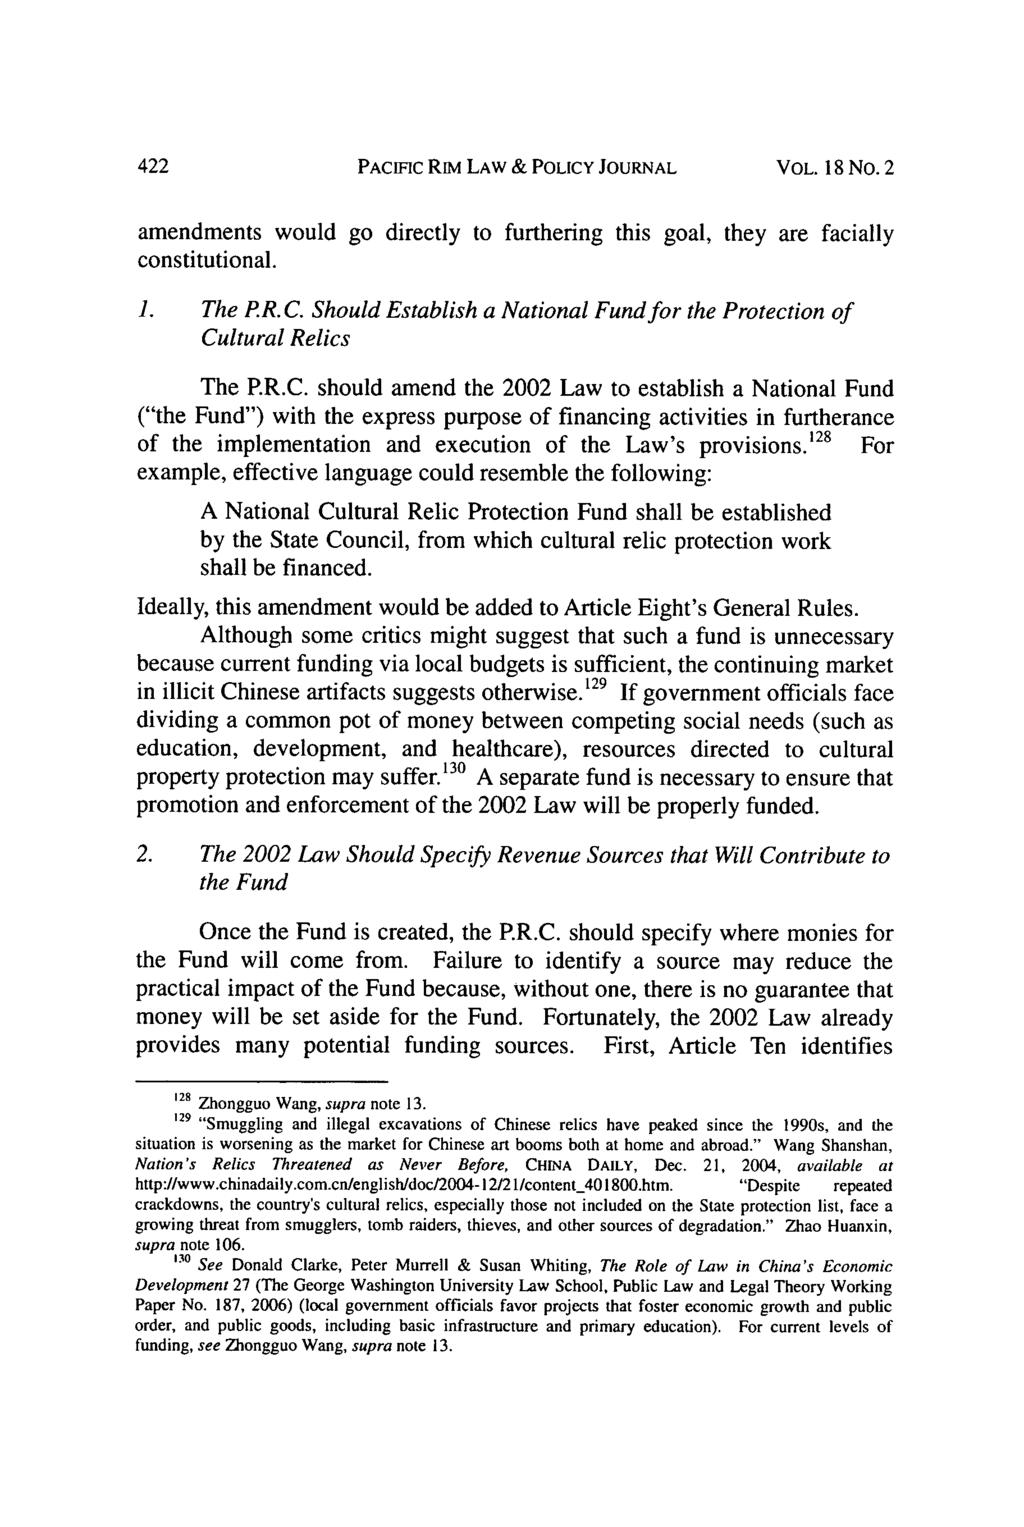 PACIFIC RIM LAW & POLICY JOURNAL VOL. 18 No. 2 amendments would go directly to furthering this goal, they are facially constitutional. 1. The P.R. C.